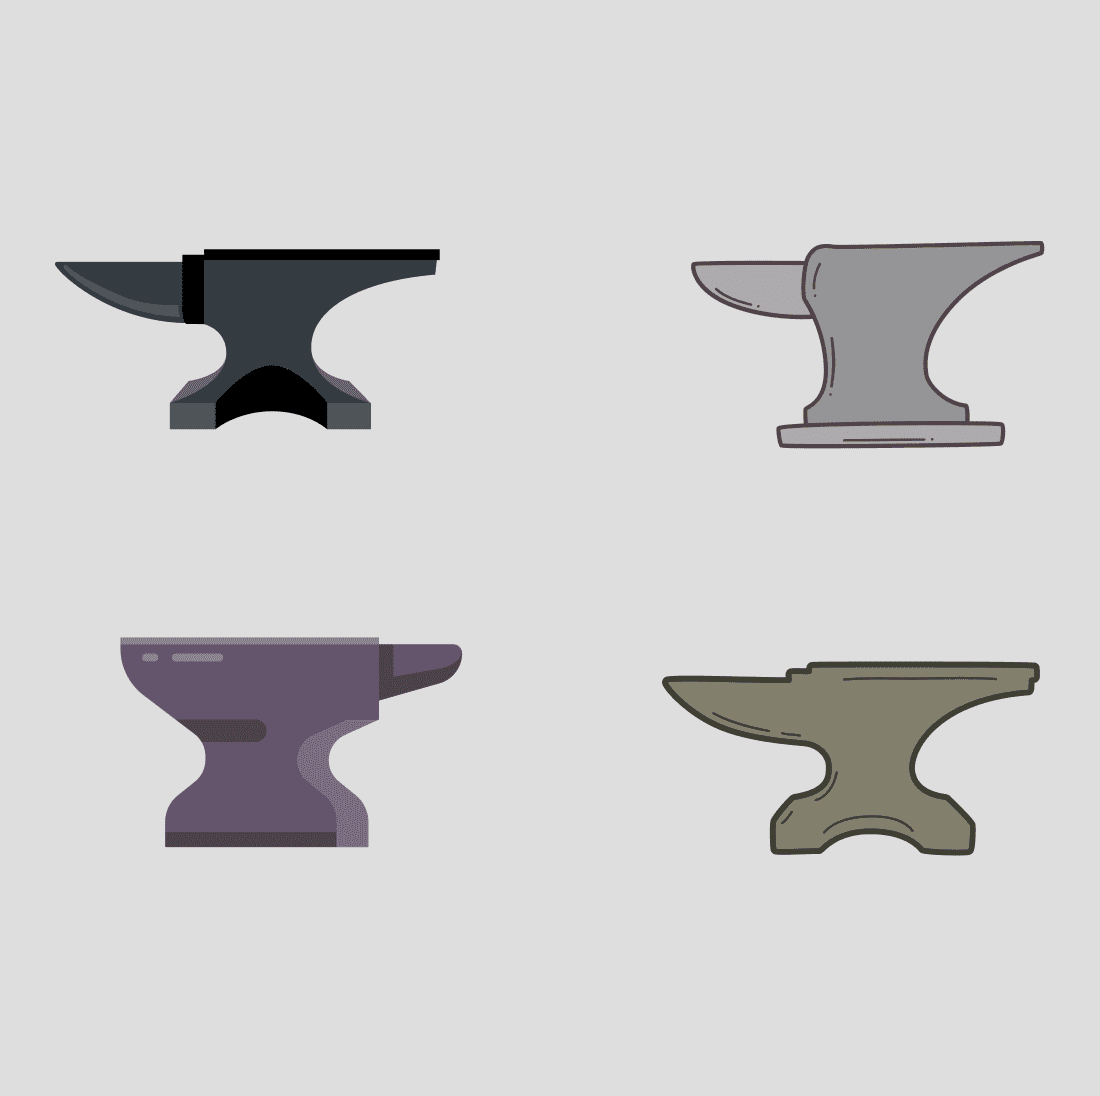 Four anvils from dark gray to light gray.